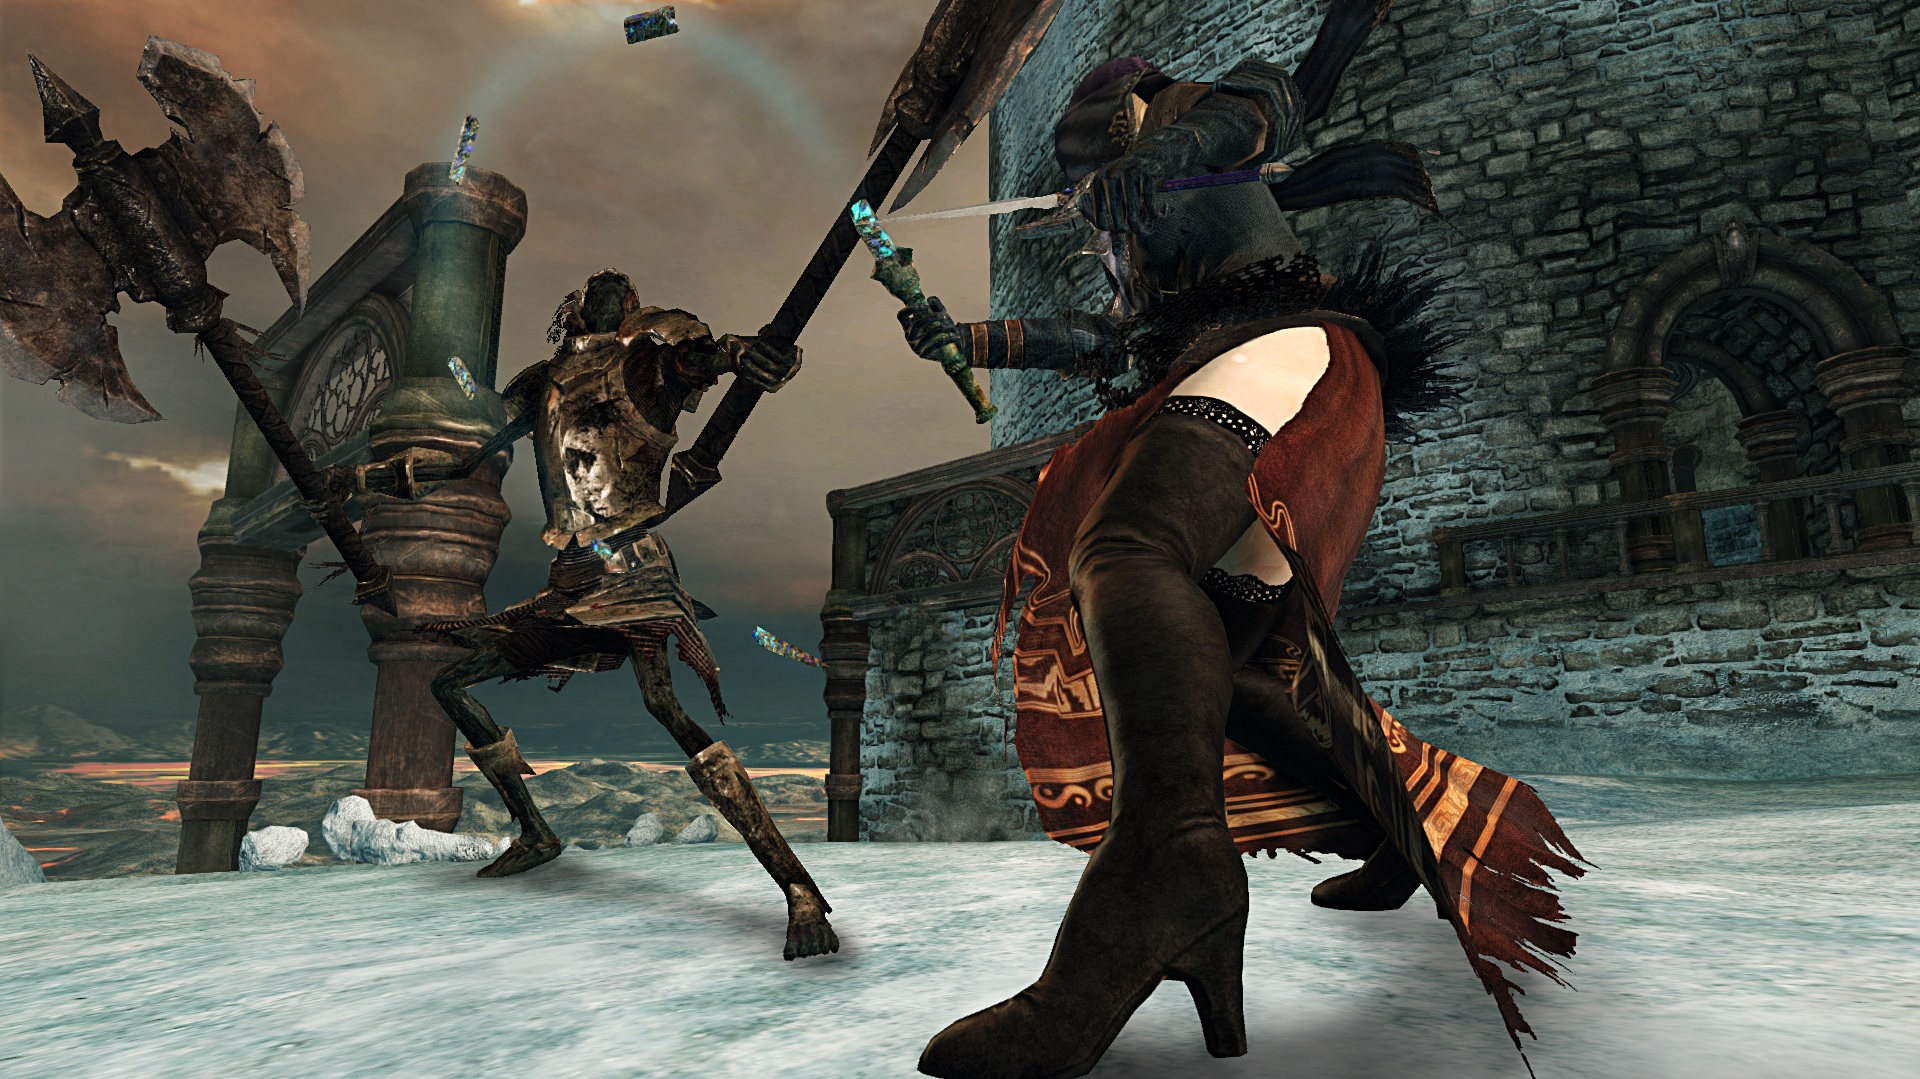 Dark Souls II: Scholar of the First Sin Cheats & Trainers for PC